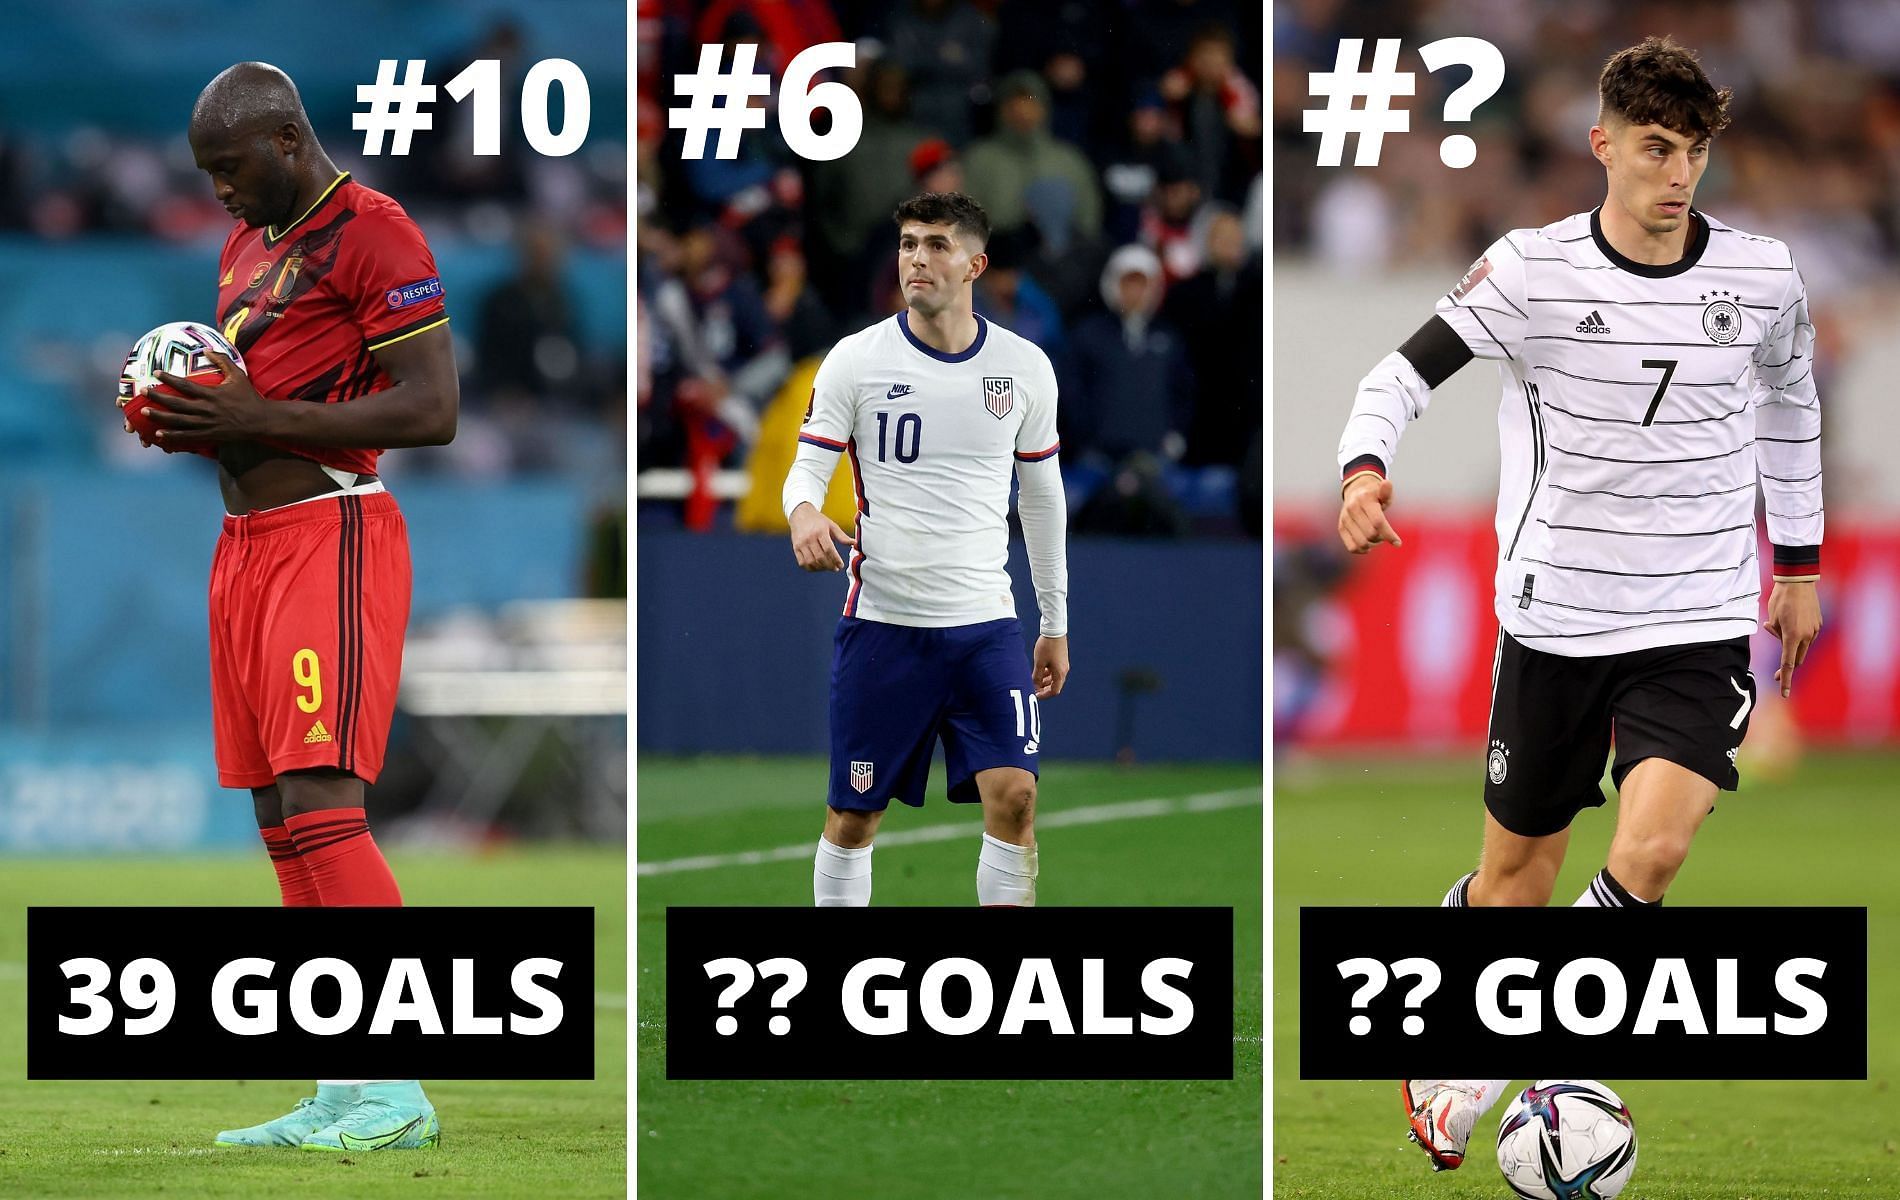 Which team has scored the most goals in international football this year?